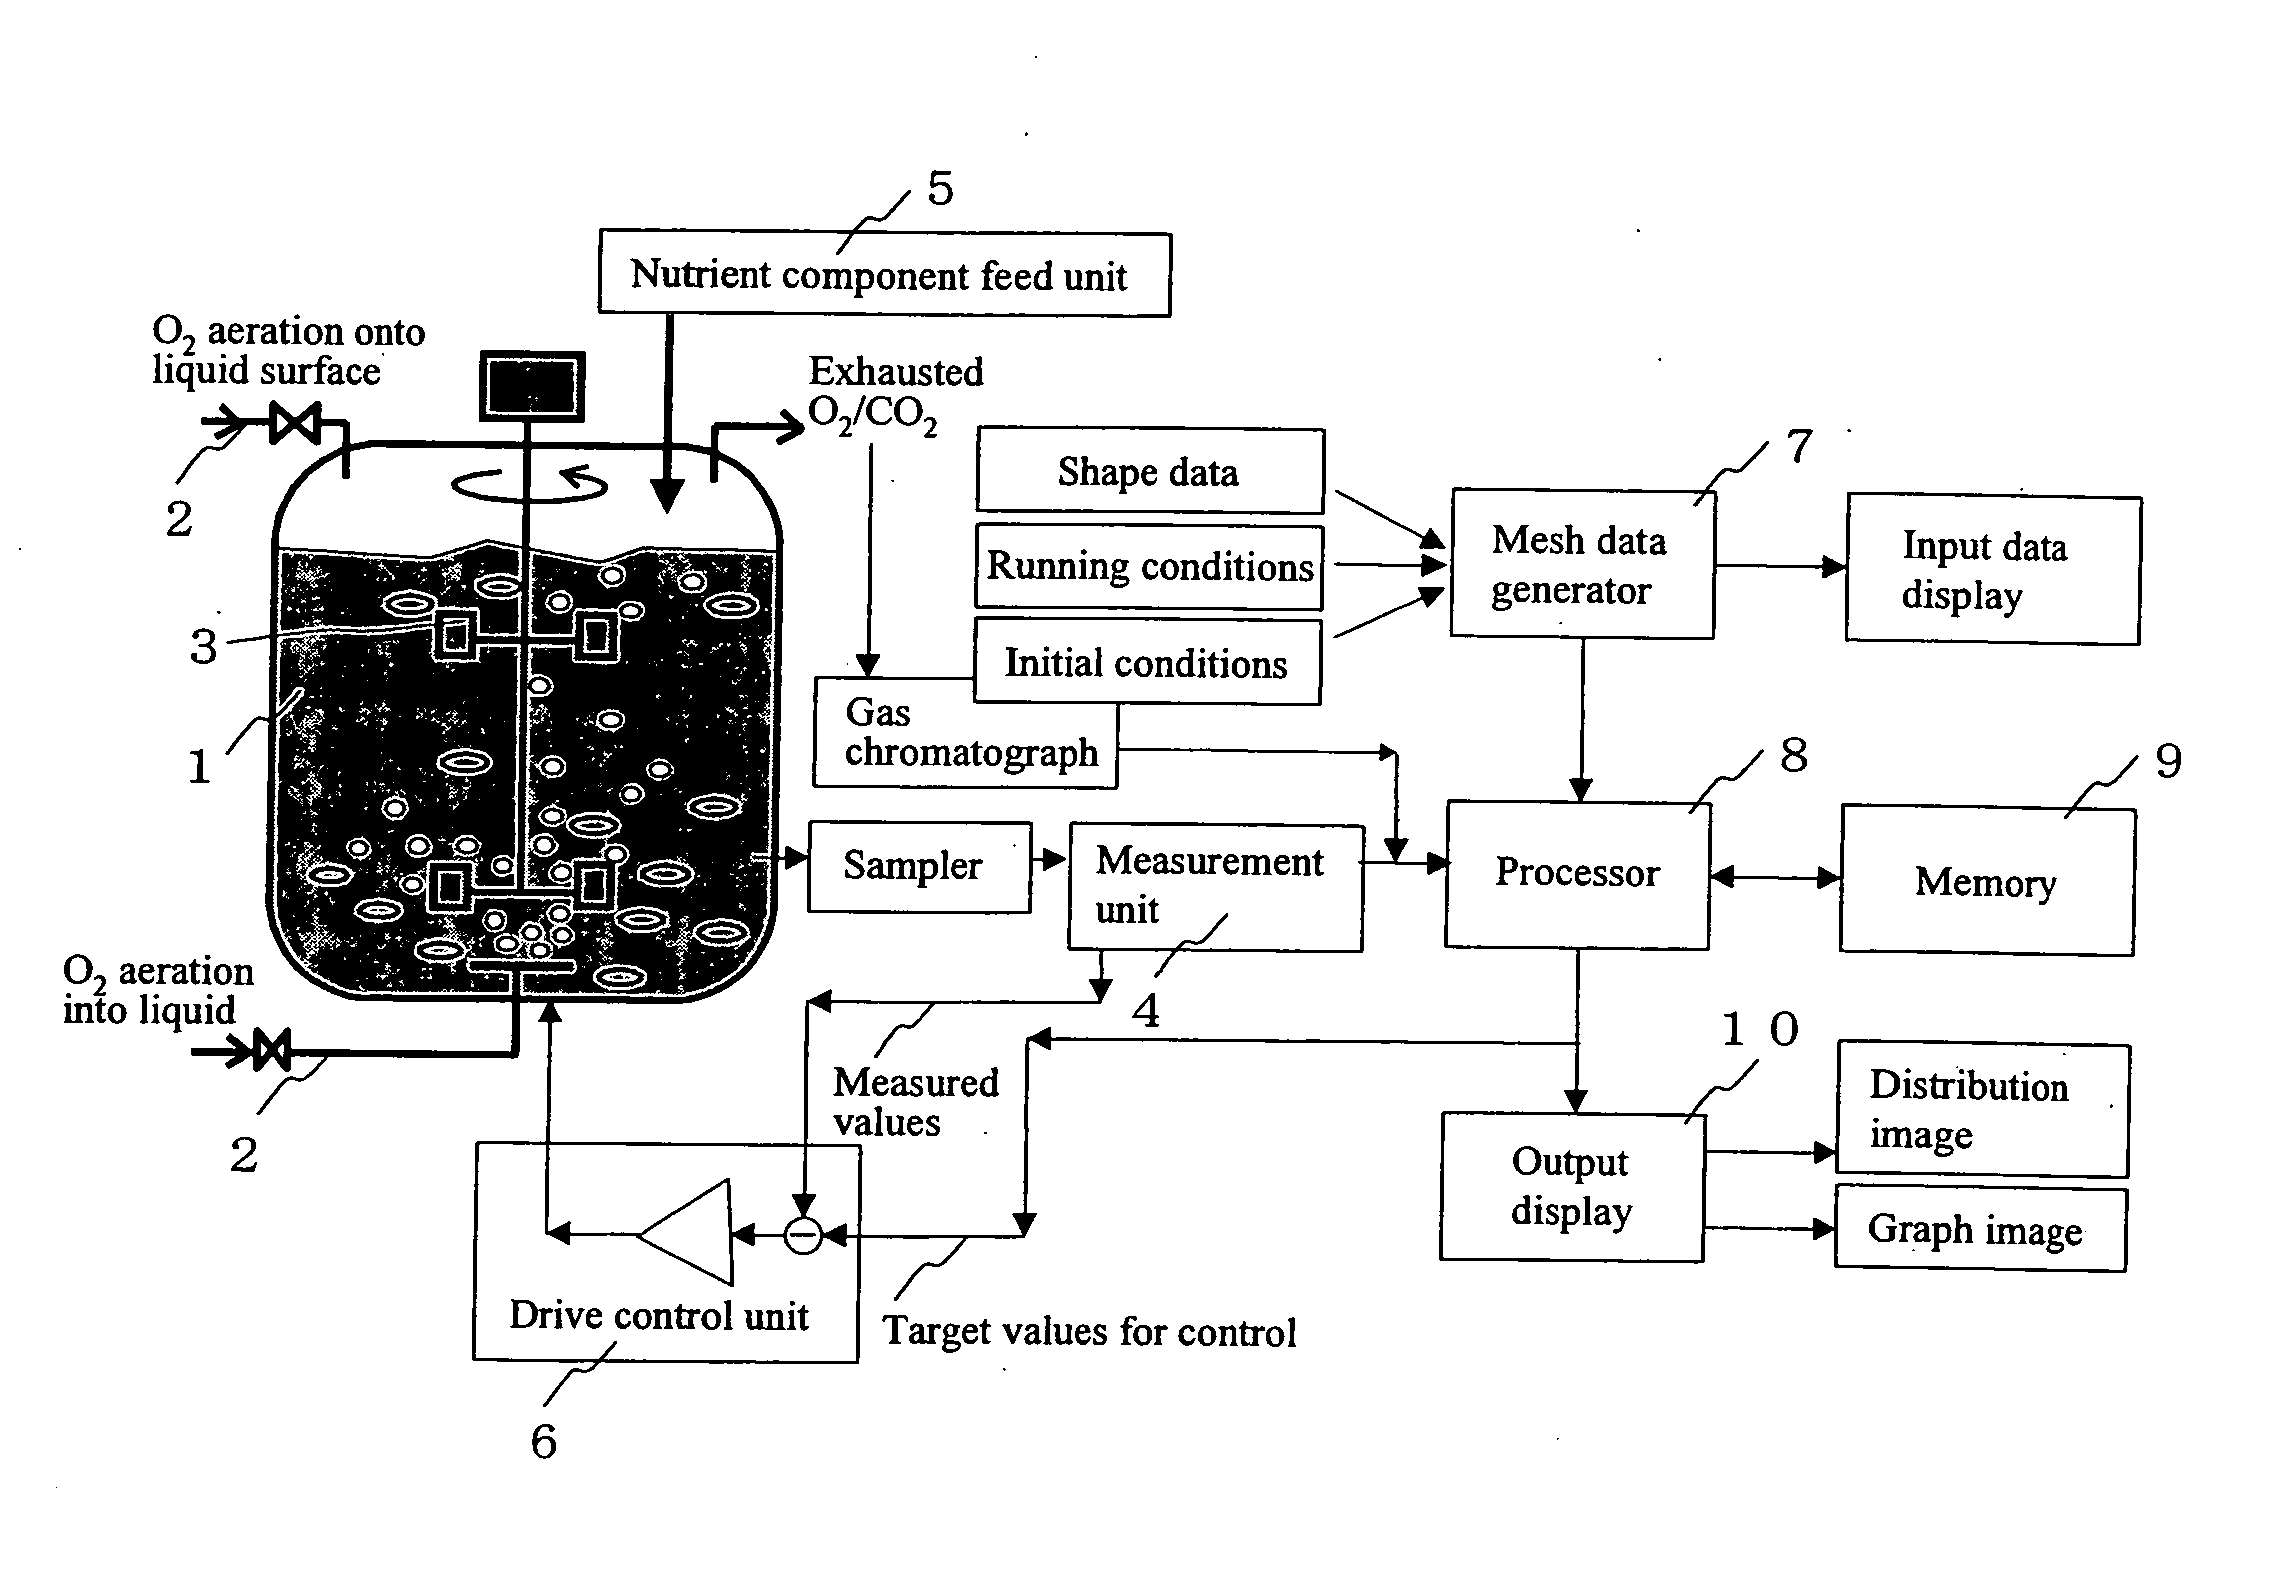 Control device for fermenter